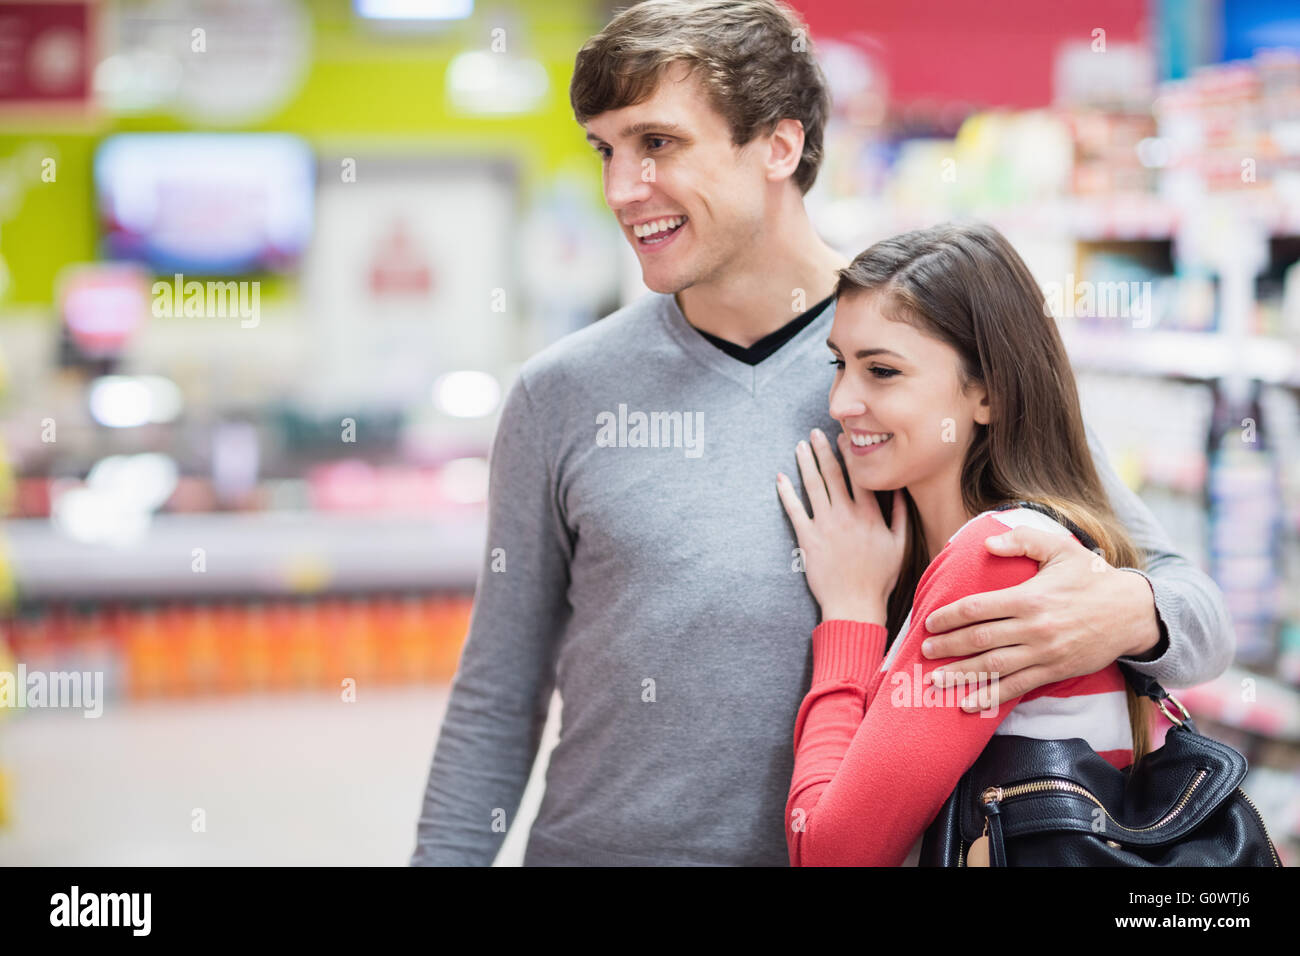 A lovely couple embracing Stock Photo